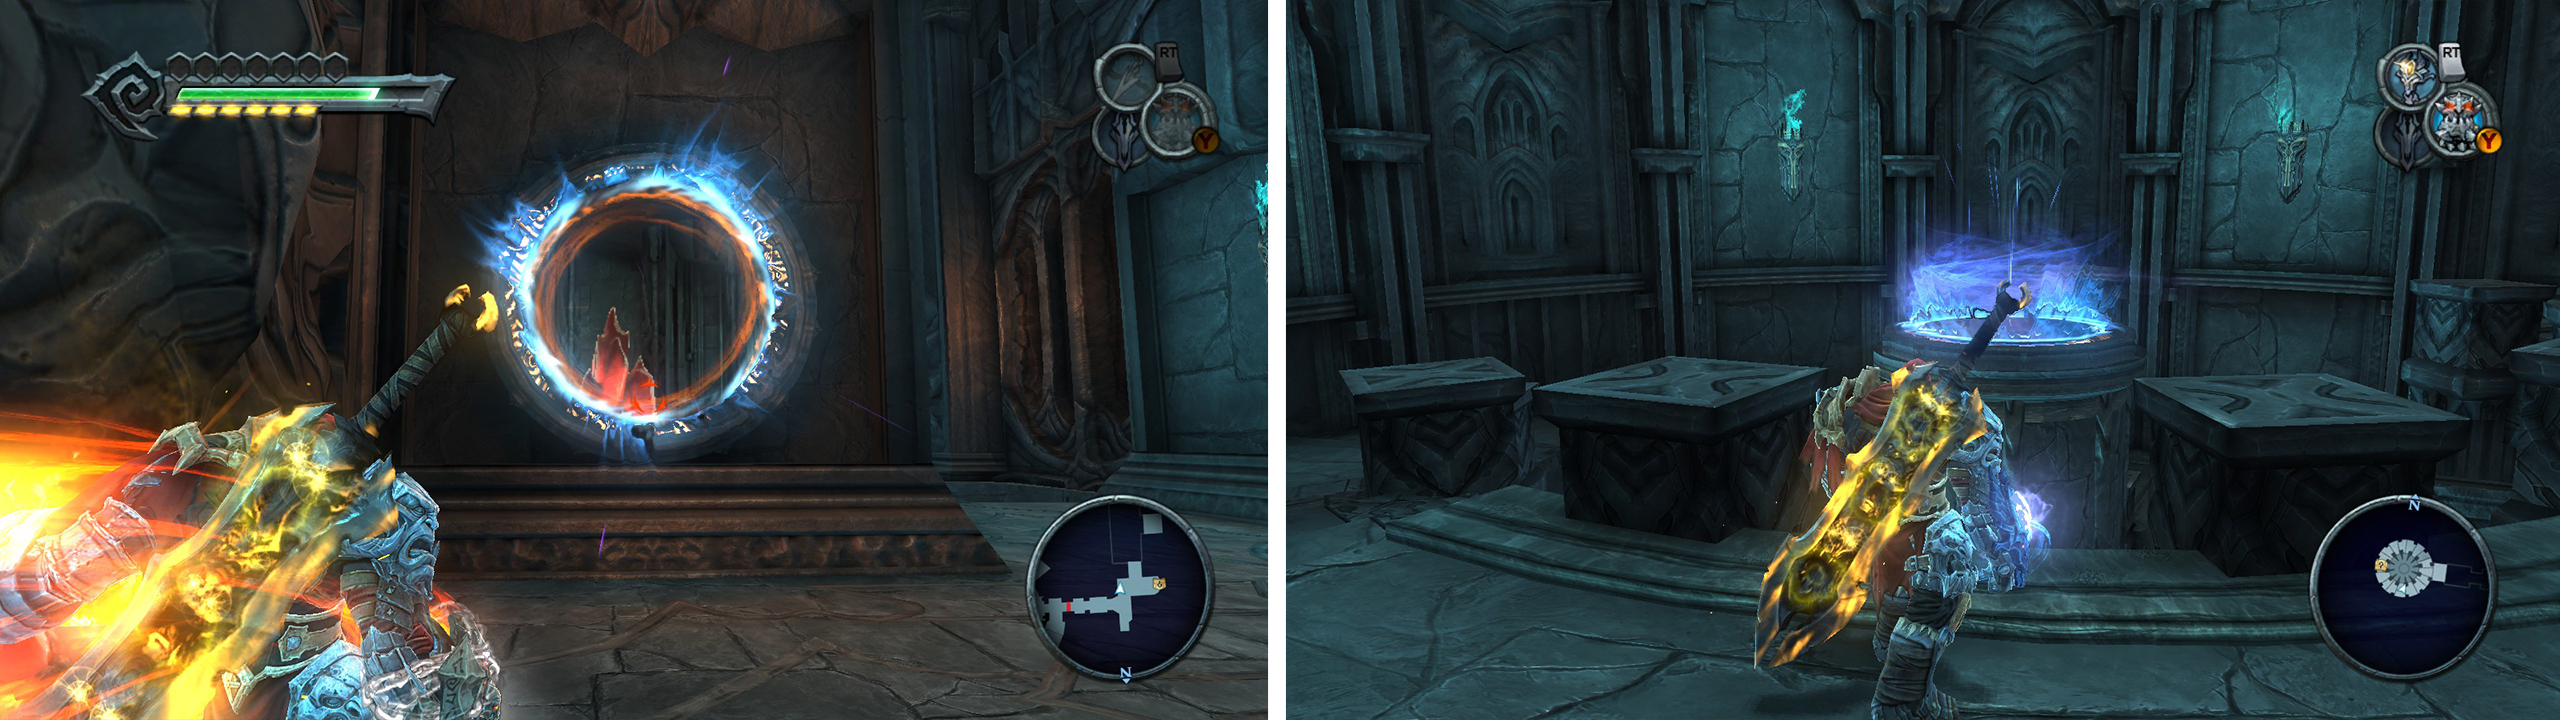 Destroy the red crystals on the initial platform via the portal (right). Return and place a portal on top of the pillar (right).